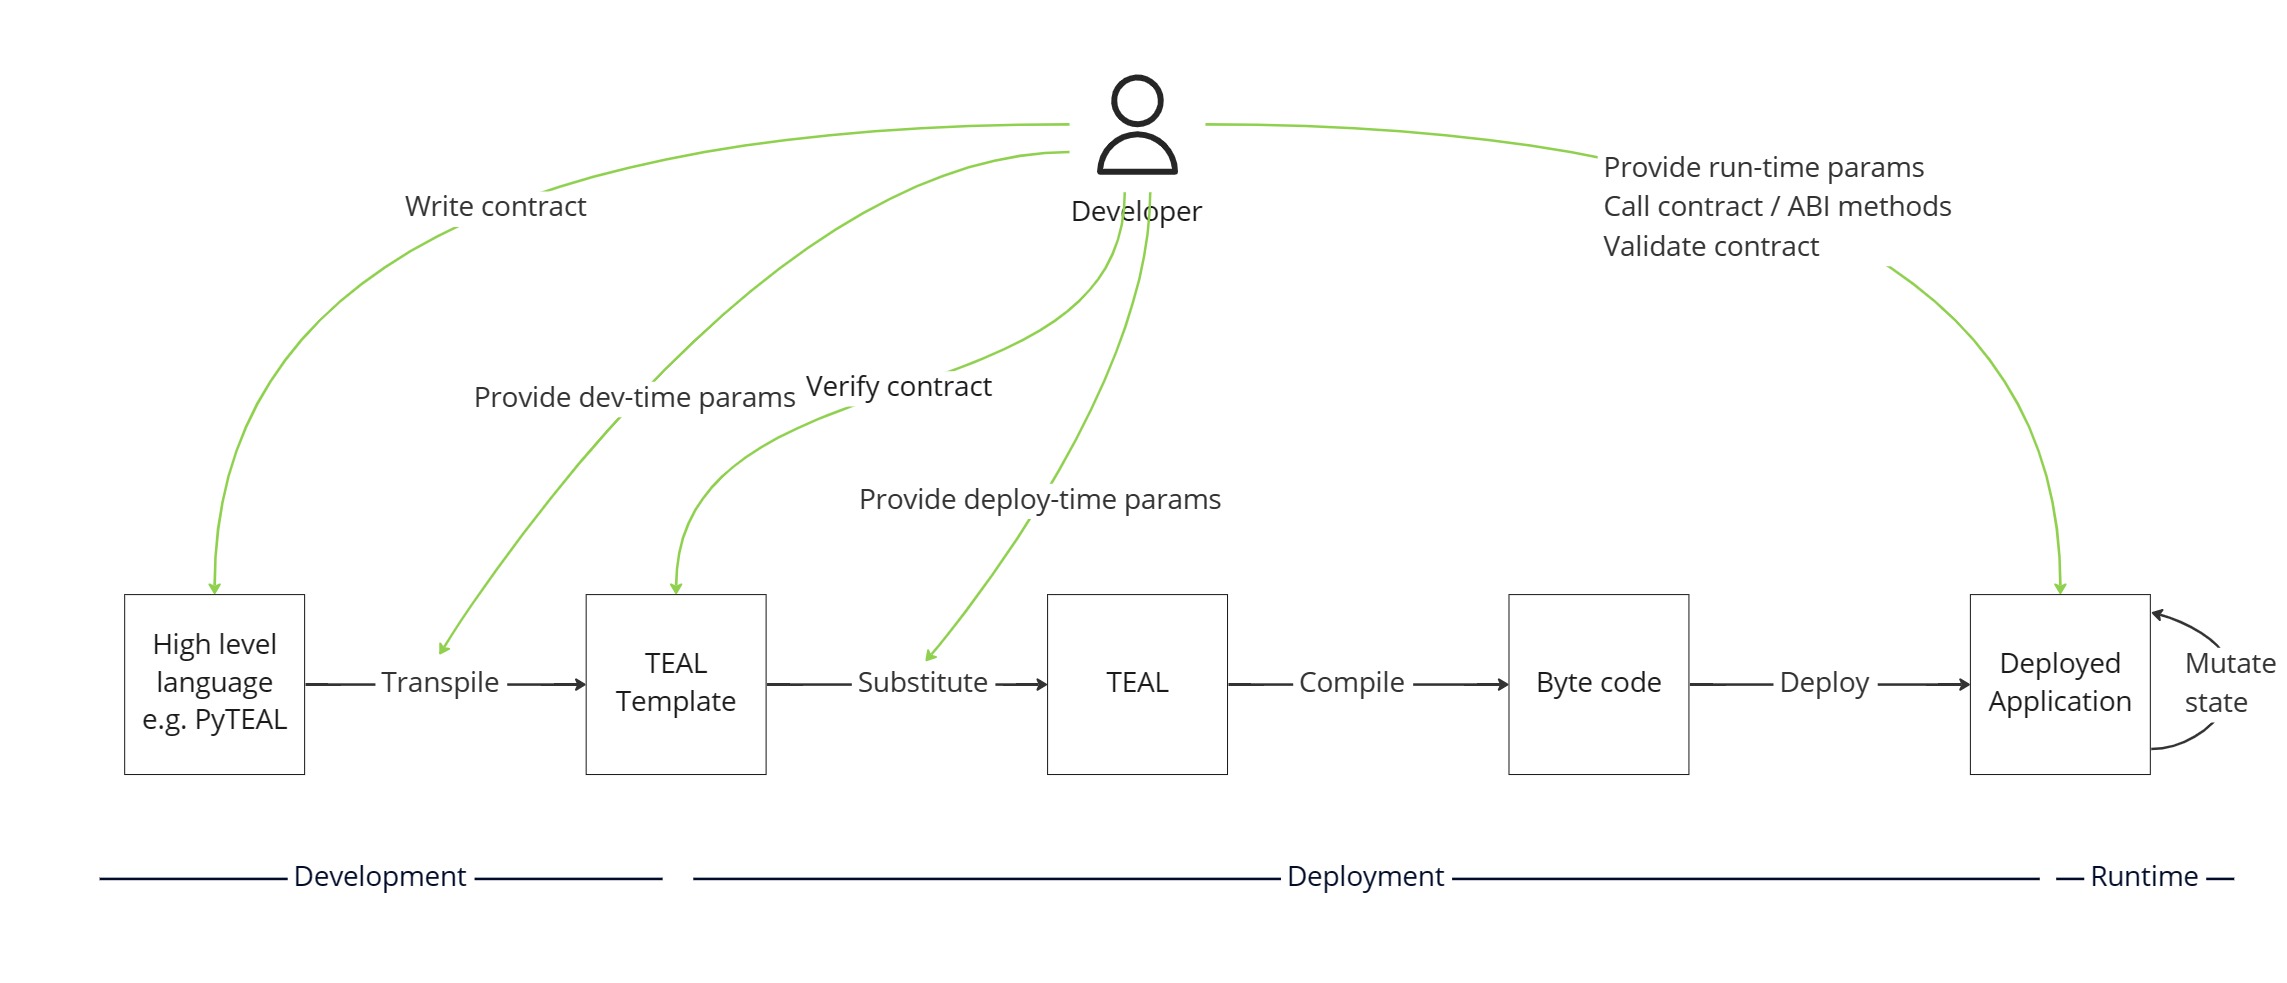 App deployment lifecycle